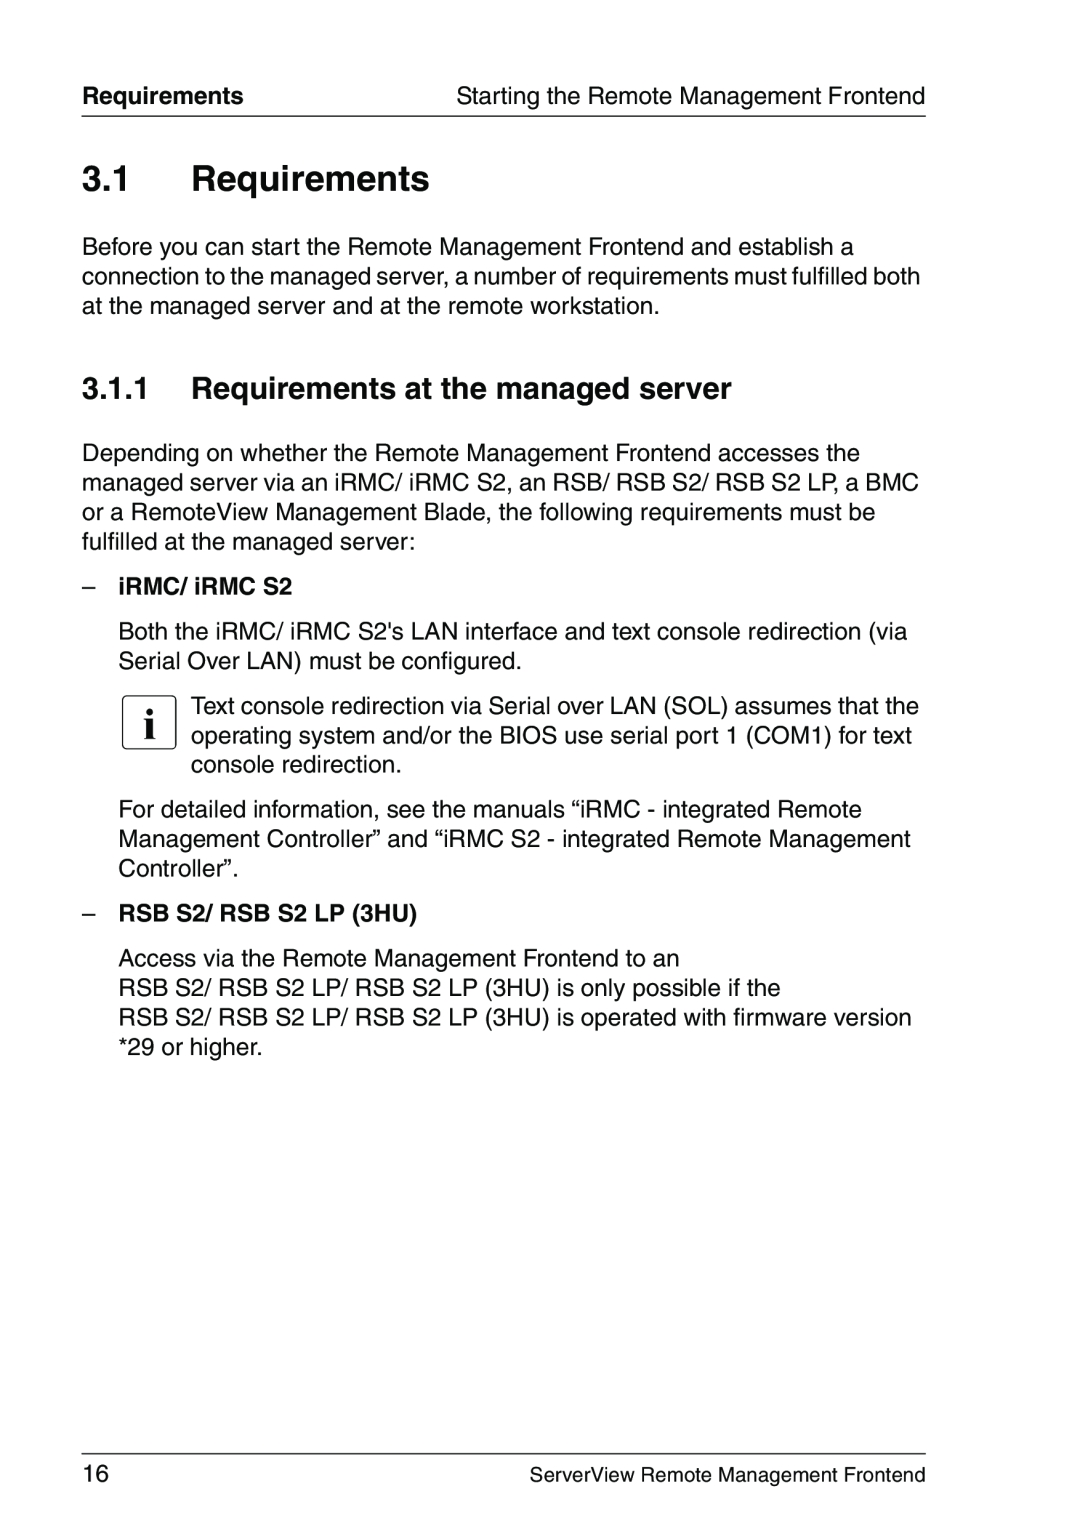 Fujitsu V4.90 manual Requirements at the managed server, iRMC/ iRMC S2, RSB S2/ RSB S2 LP 3HU 